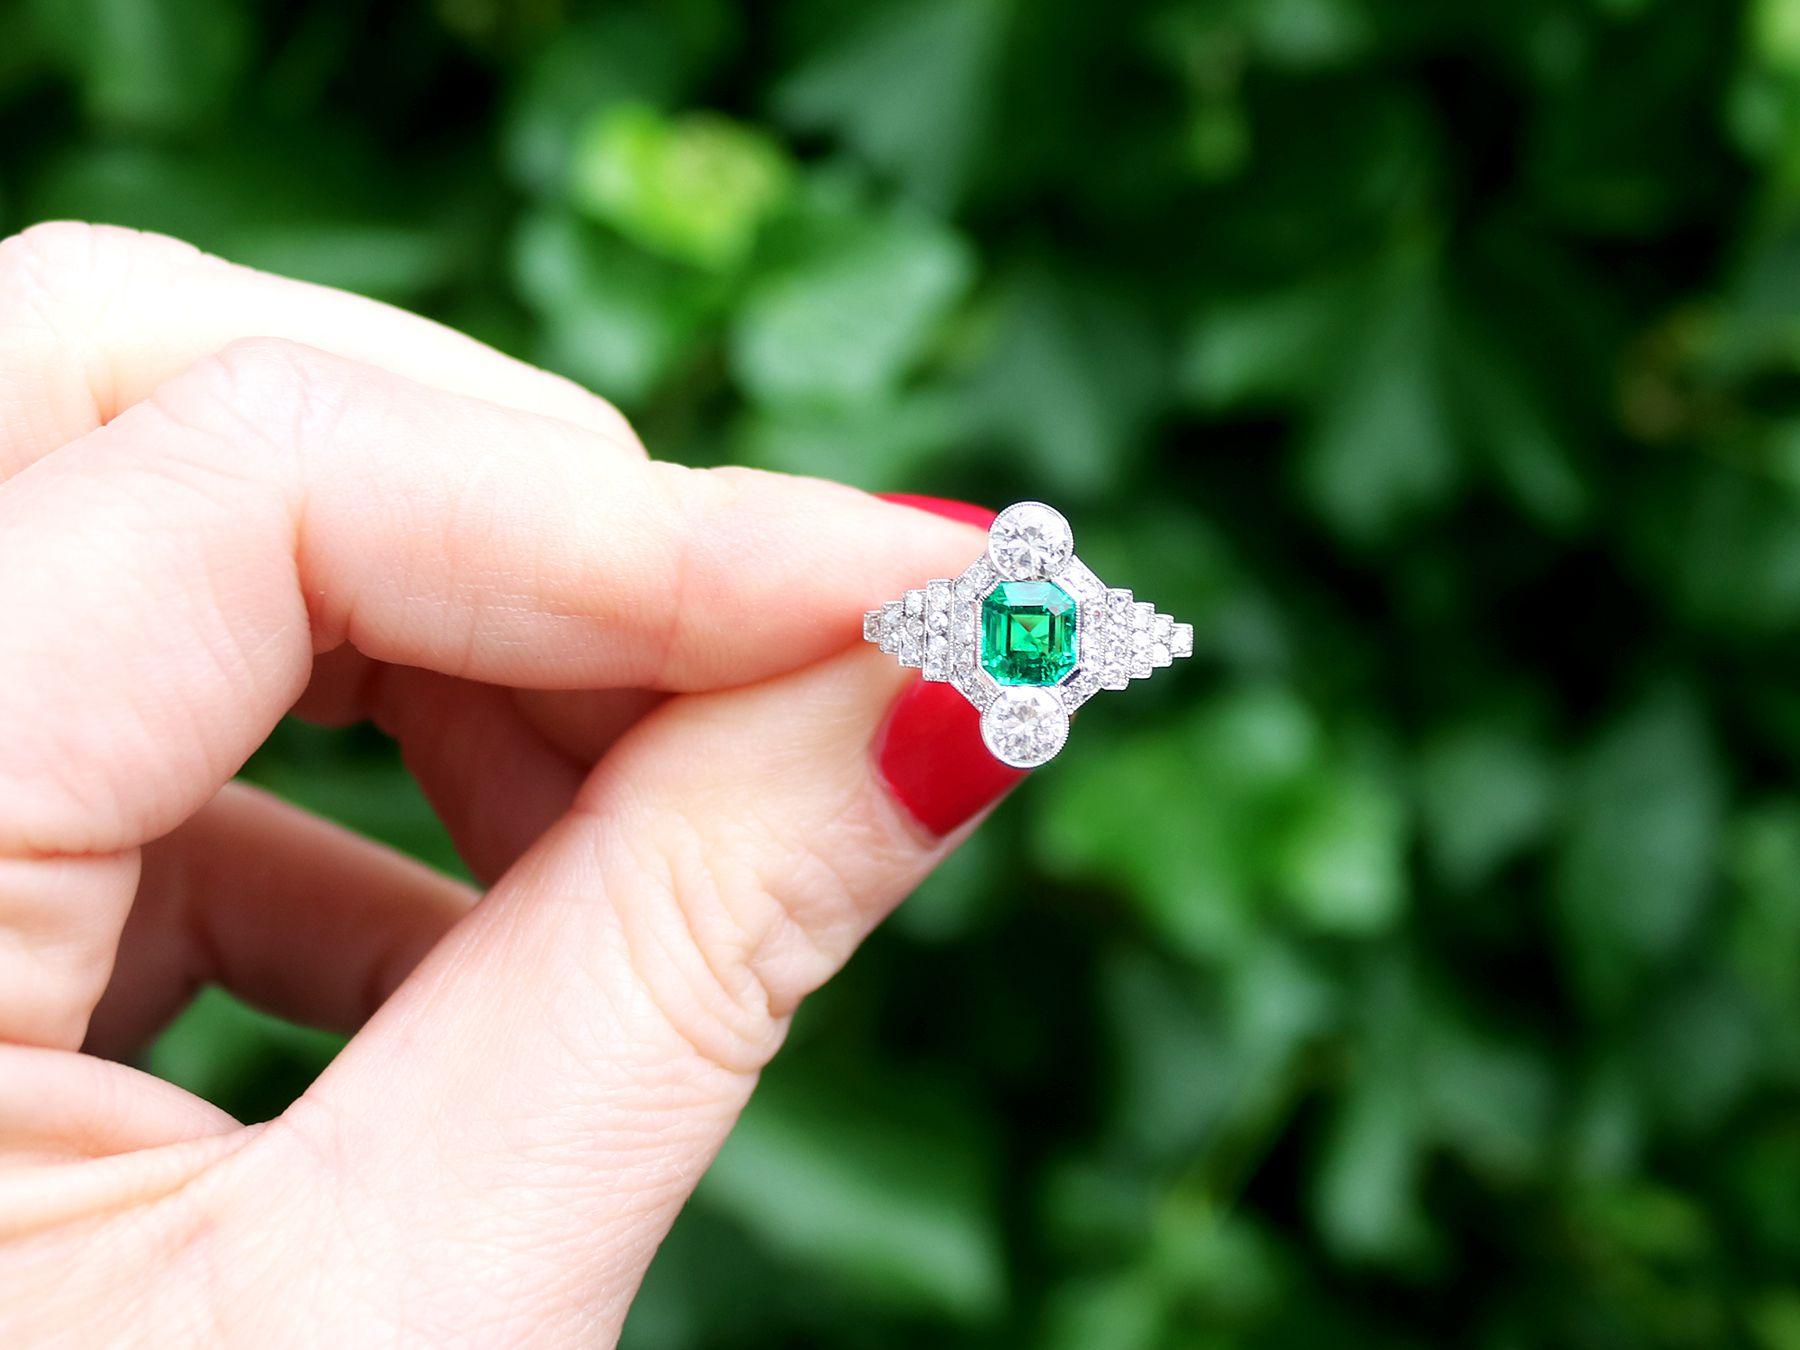 A stunning antique French 0.97 carat Colombian emerald and 1.06 carat diamond, platinum dress ring; part of our diverse antique jewelry and estate jewelry collections

This stunning, fine and impressive antique emerald and diamond ring has been